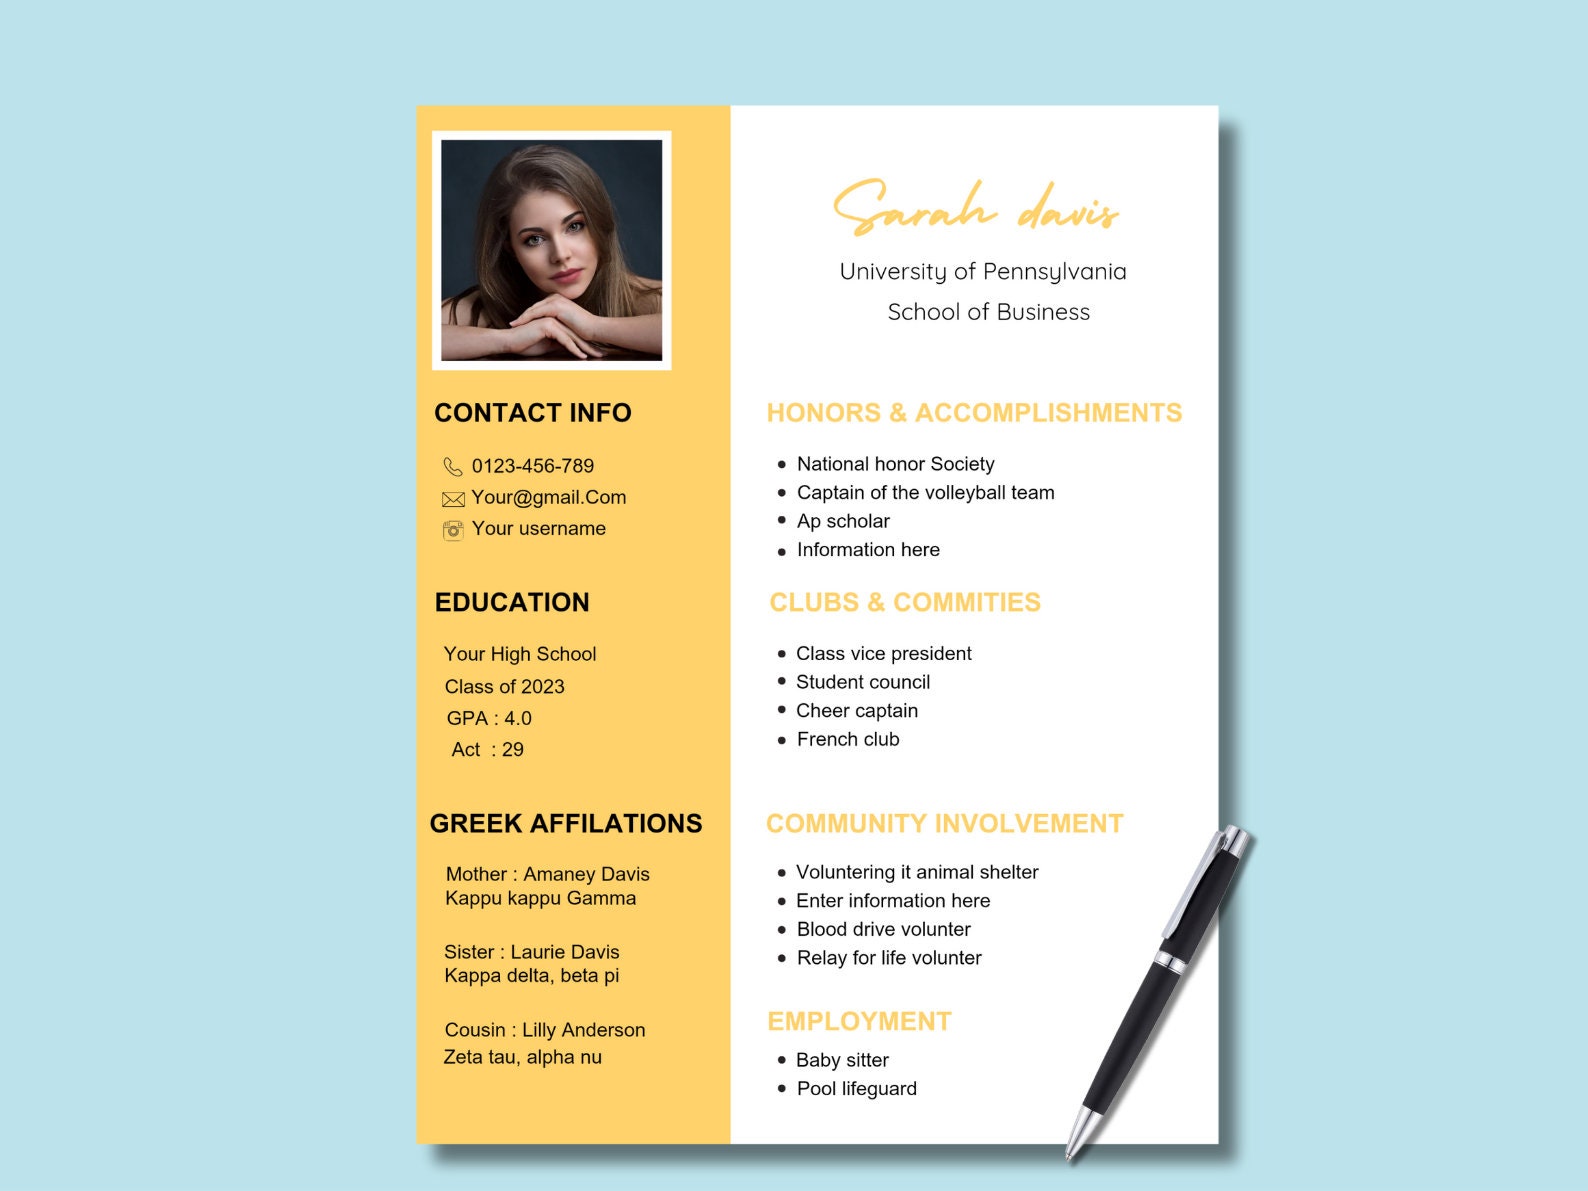 Combination Resume Template Word, Google Docs, Apple Pages Mac Functional  Resume, Skills Based Resume, Skills Resume, Hybrid Resume 